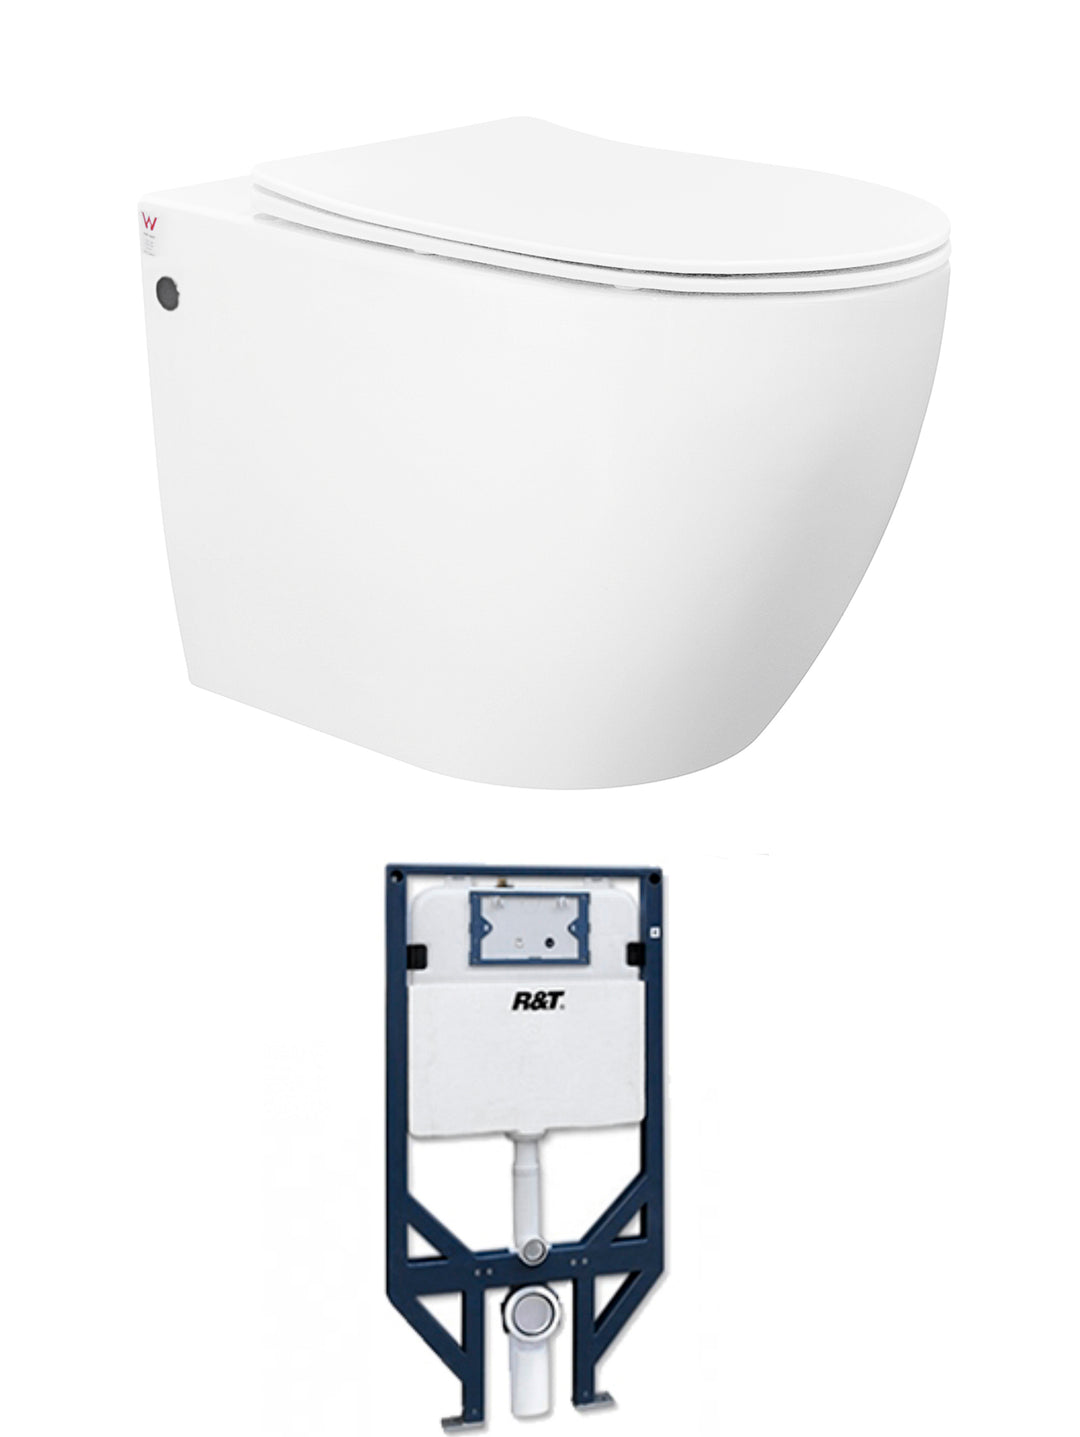 Voghera Wall Hung Pan slim seat with R&T Cistern only (Button Order Separately) IVWHPRLVAPK-NP